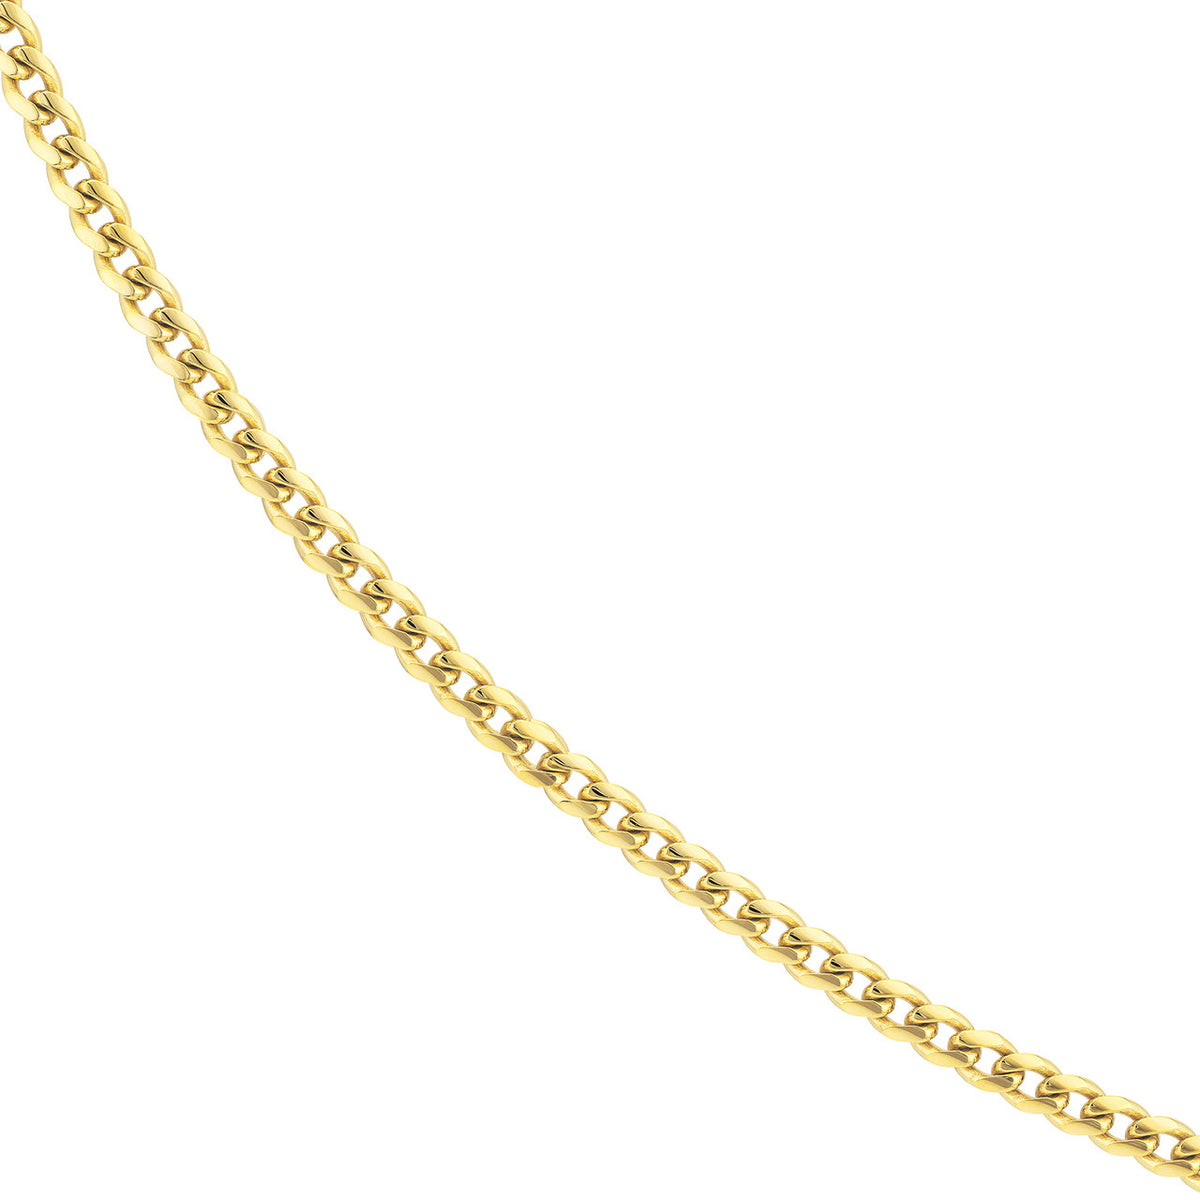 Solid 14K Gold 5mm Miami Cuban Chain Necklace with Lobster Lock